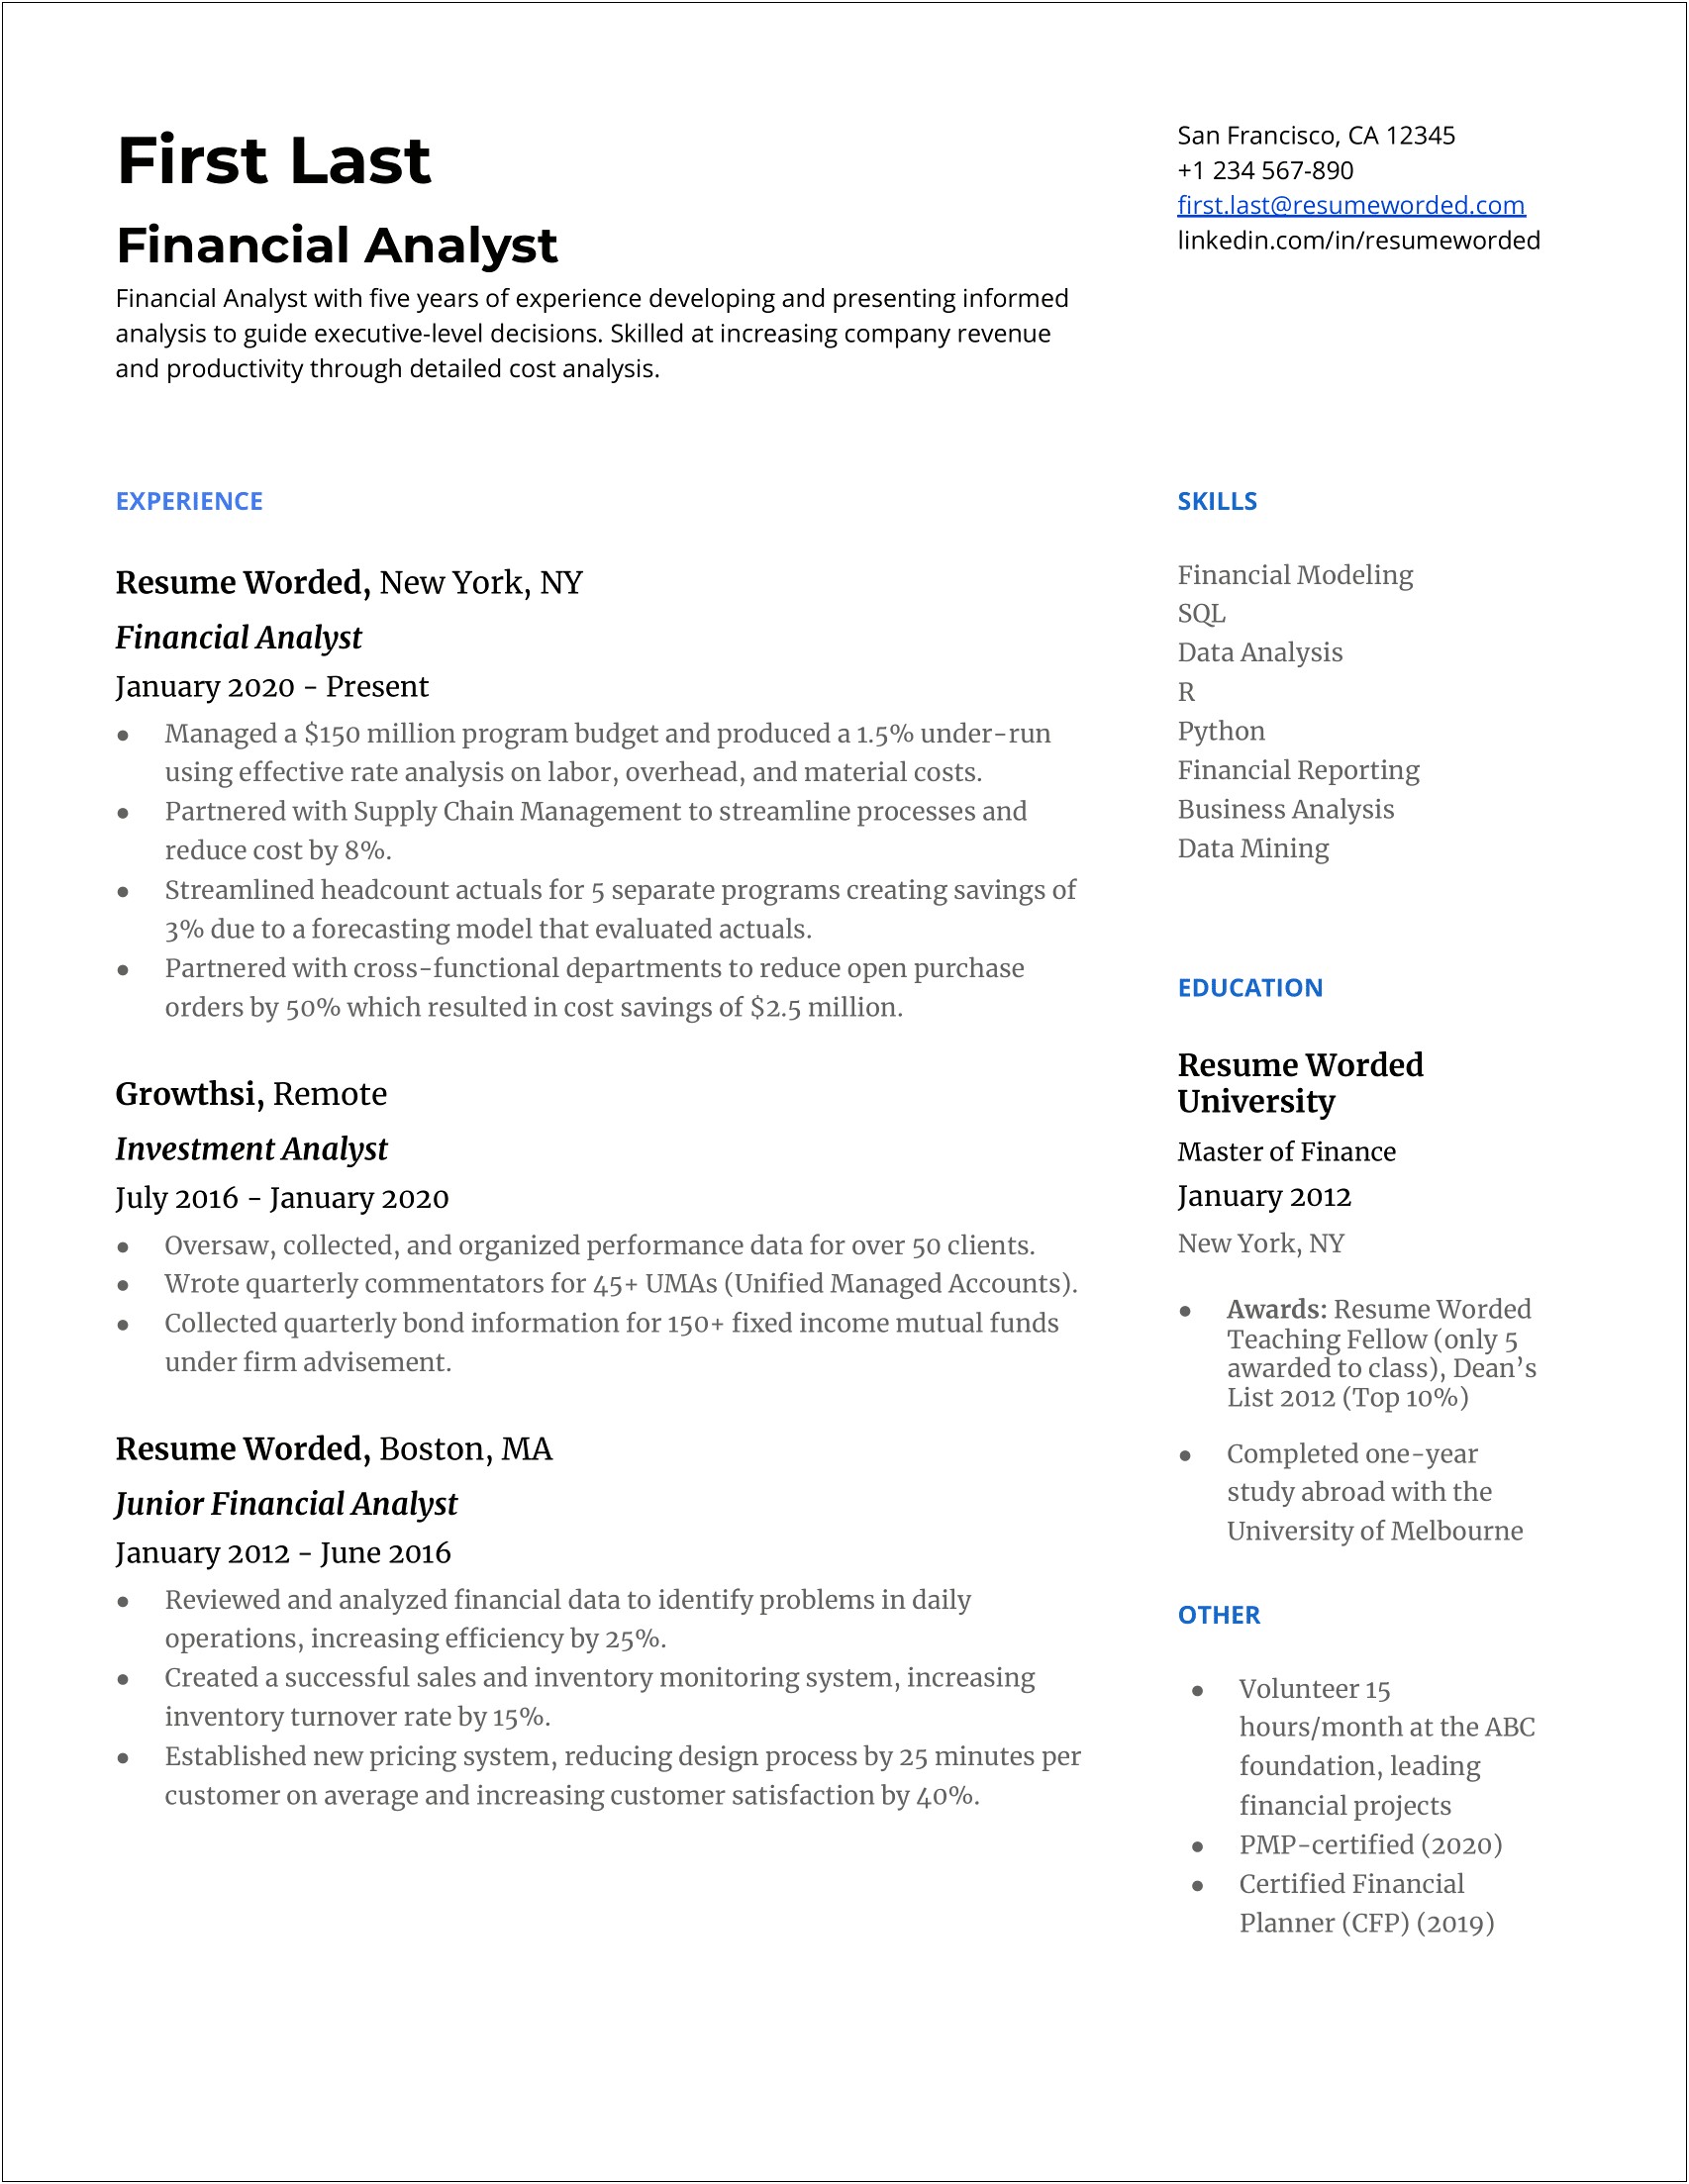 Sample Real Estate Property Accountant Resume Templates